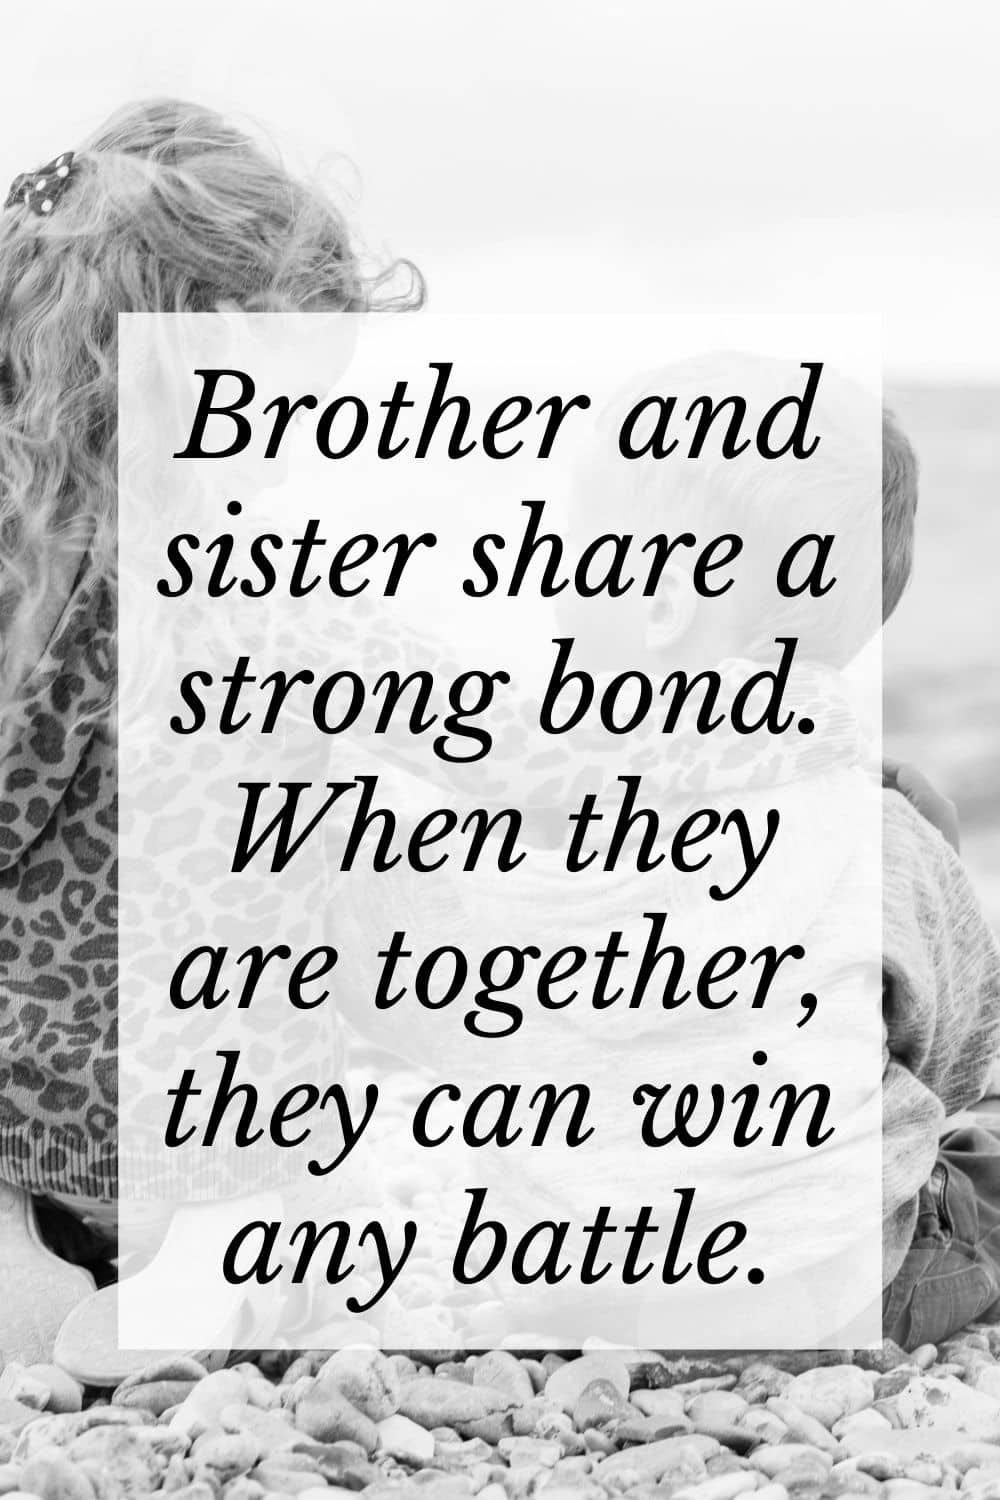 Brother and sister quote 